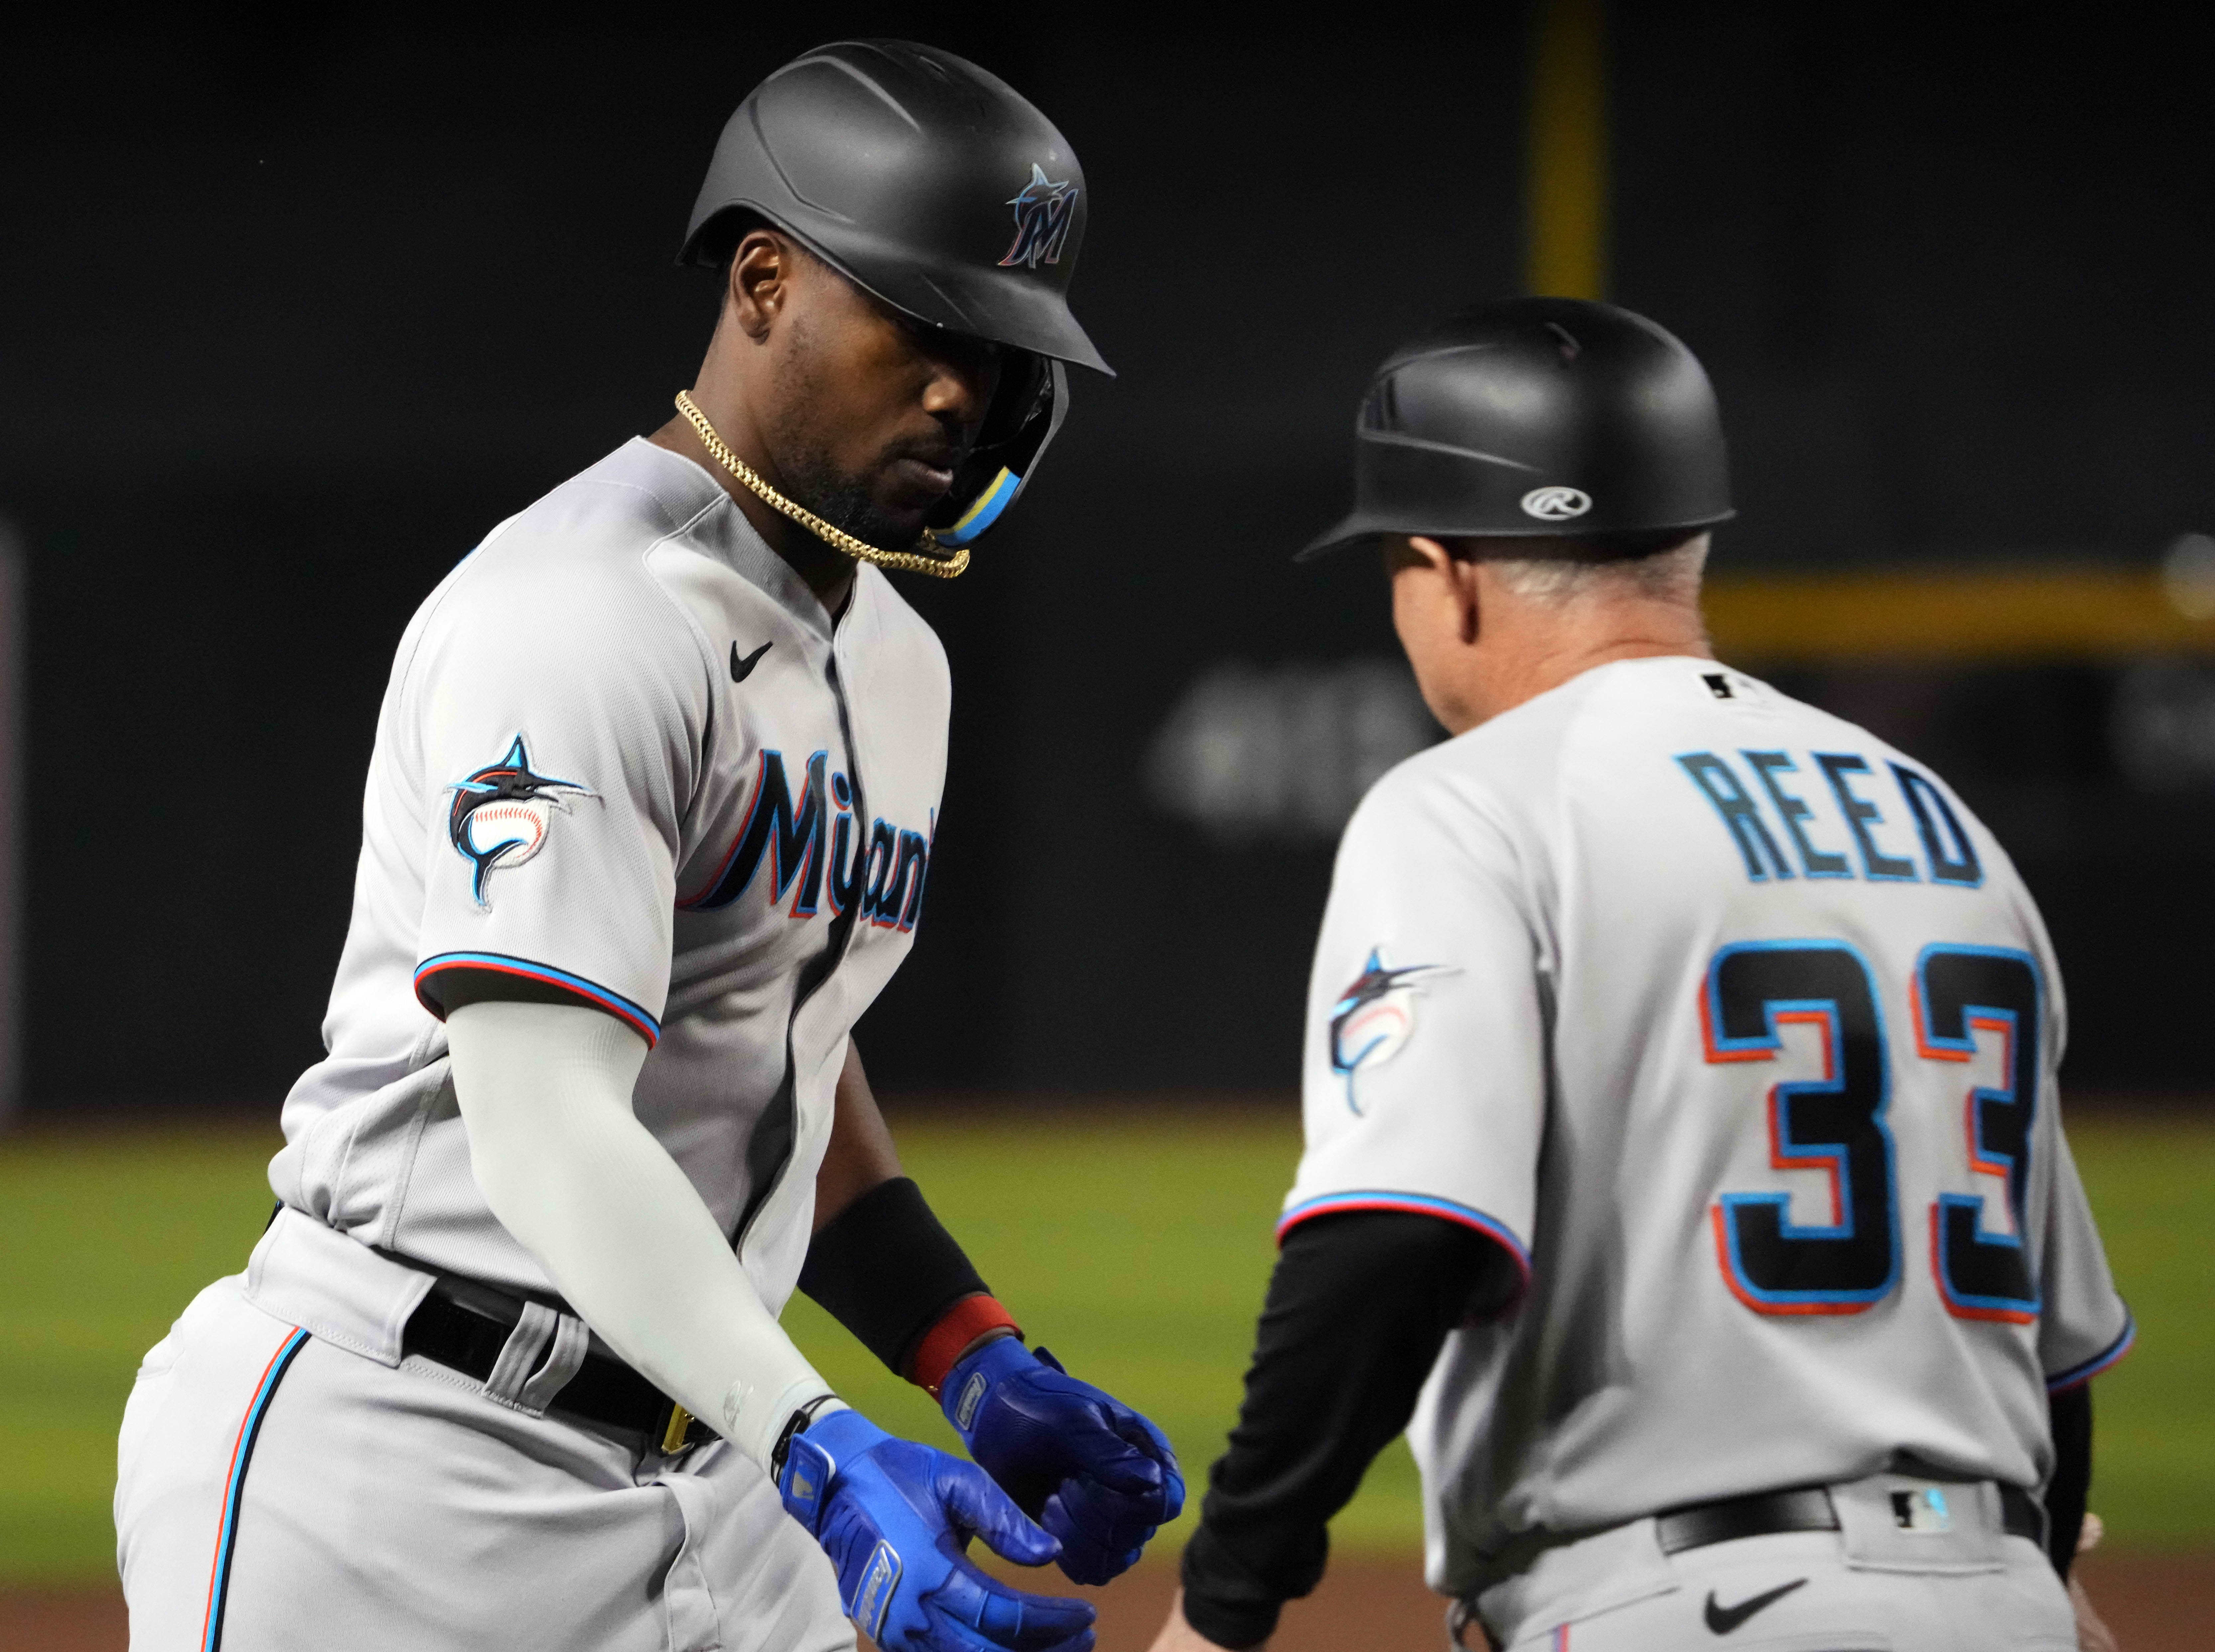 Marlins designated hitter Jorge Soler (12) slaps hands with Miami Marlins third base/infield coach Jody Reed (33) after hitting a home run against the Arizona Diamondbacks during the fifth inning at Chase Field.